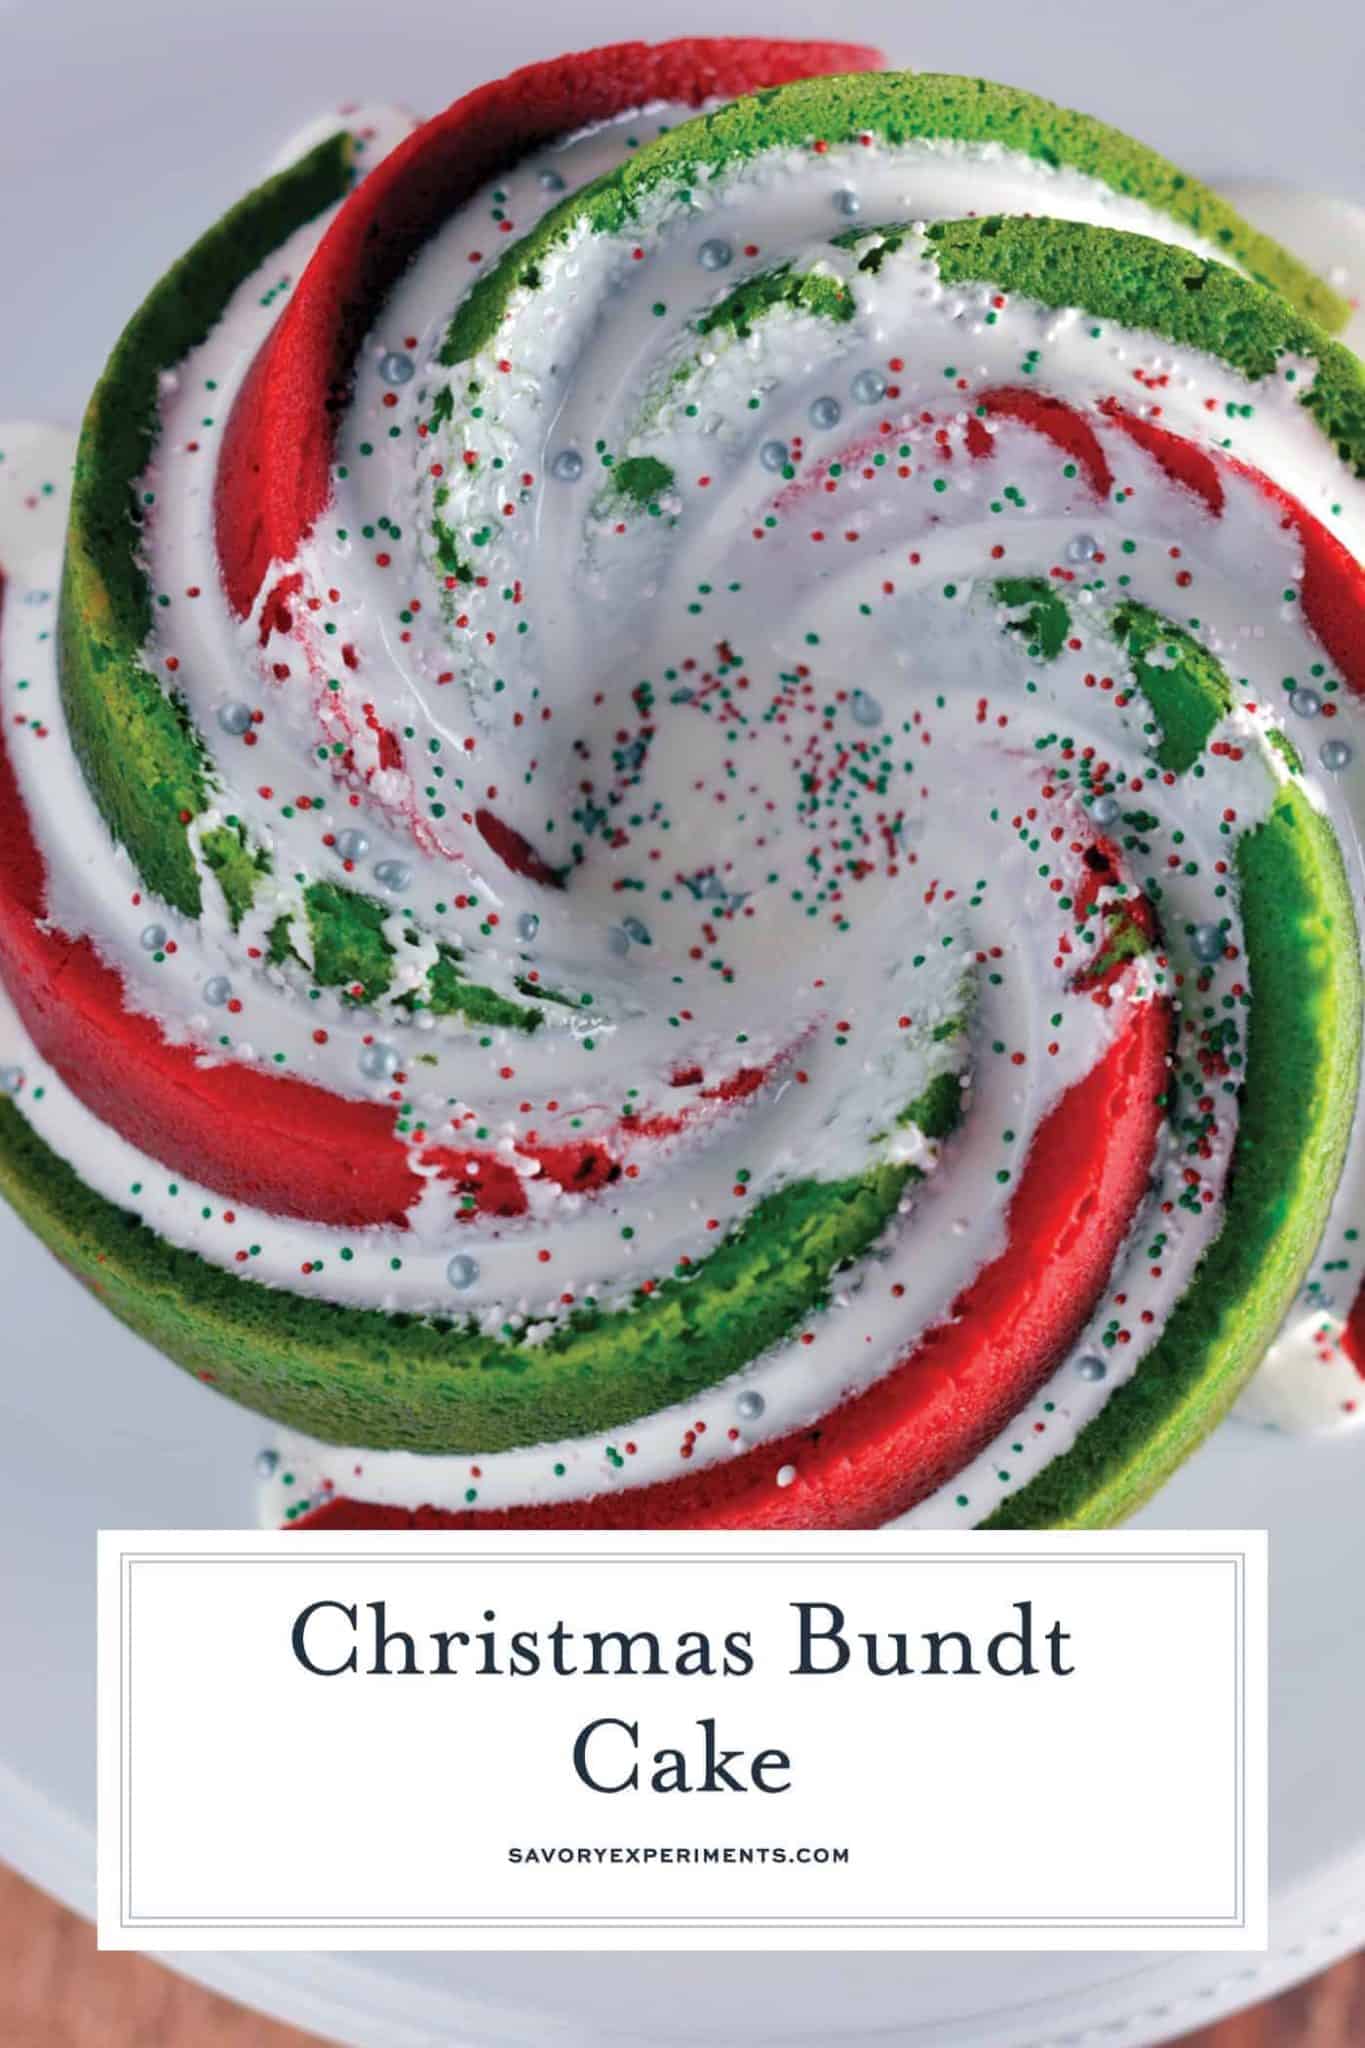 Christmas Bundt Cake - A Festive Red and Green Holiday Cake!